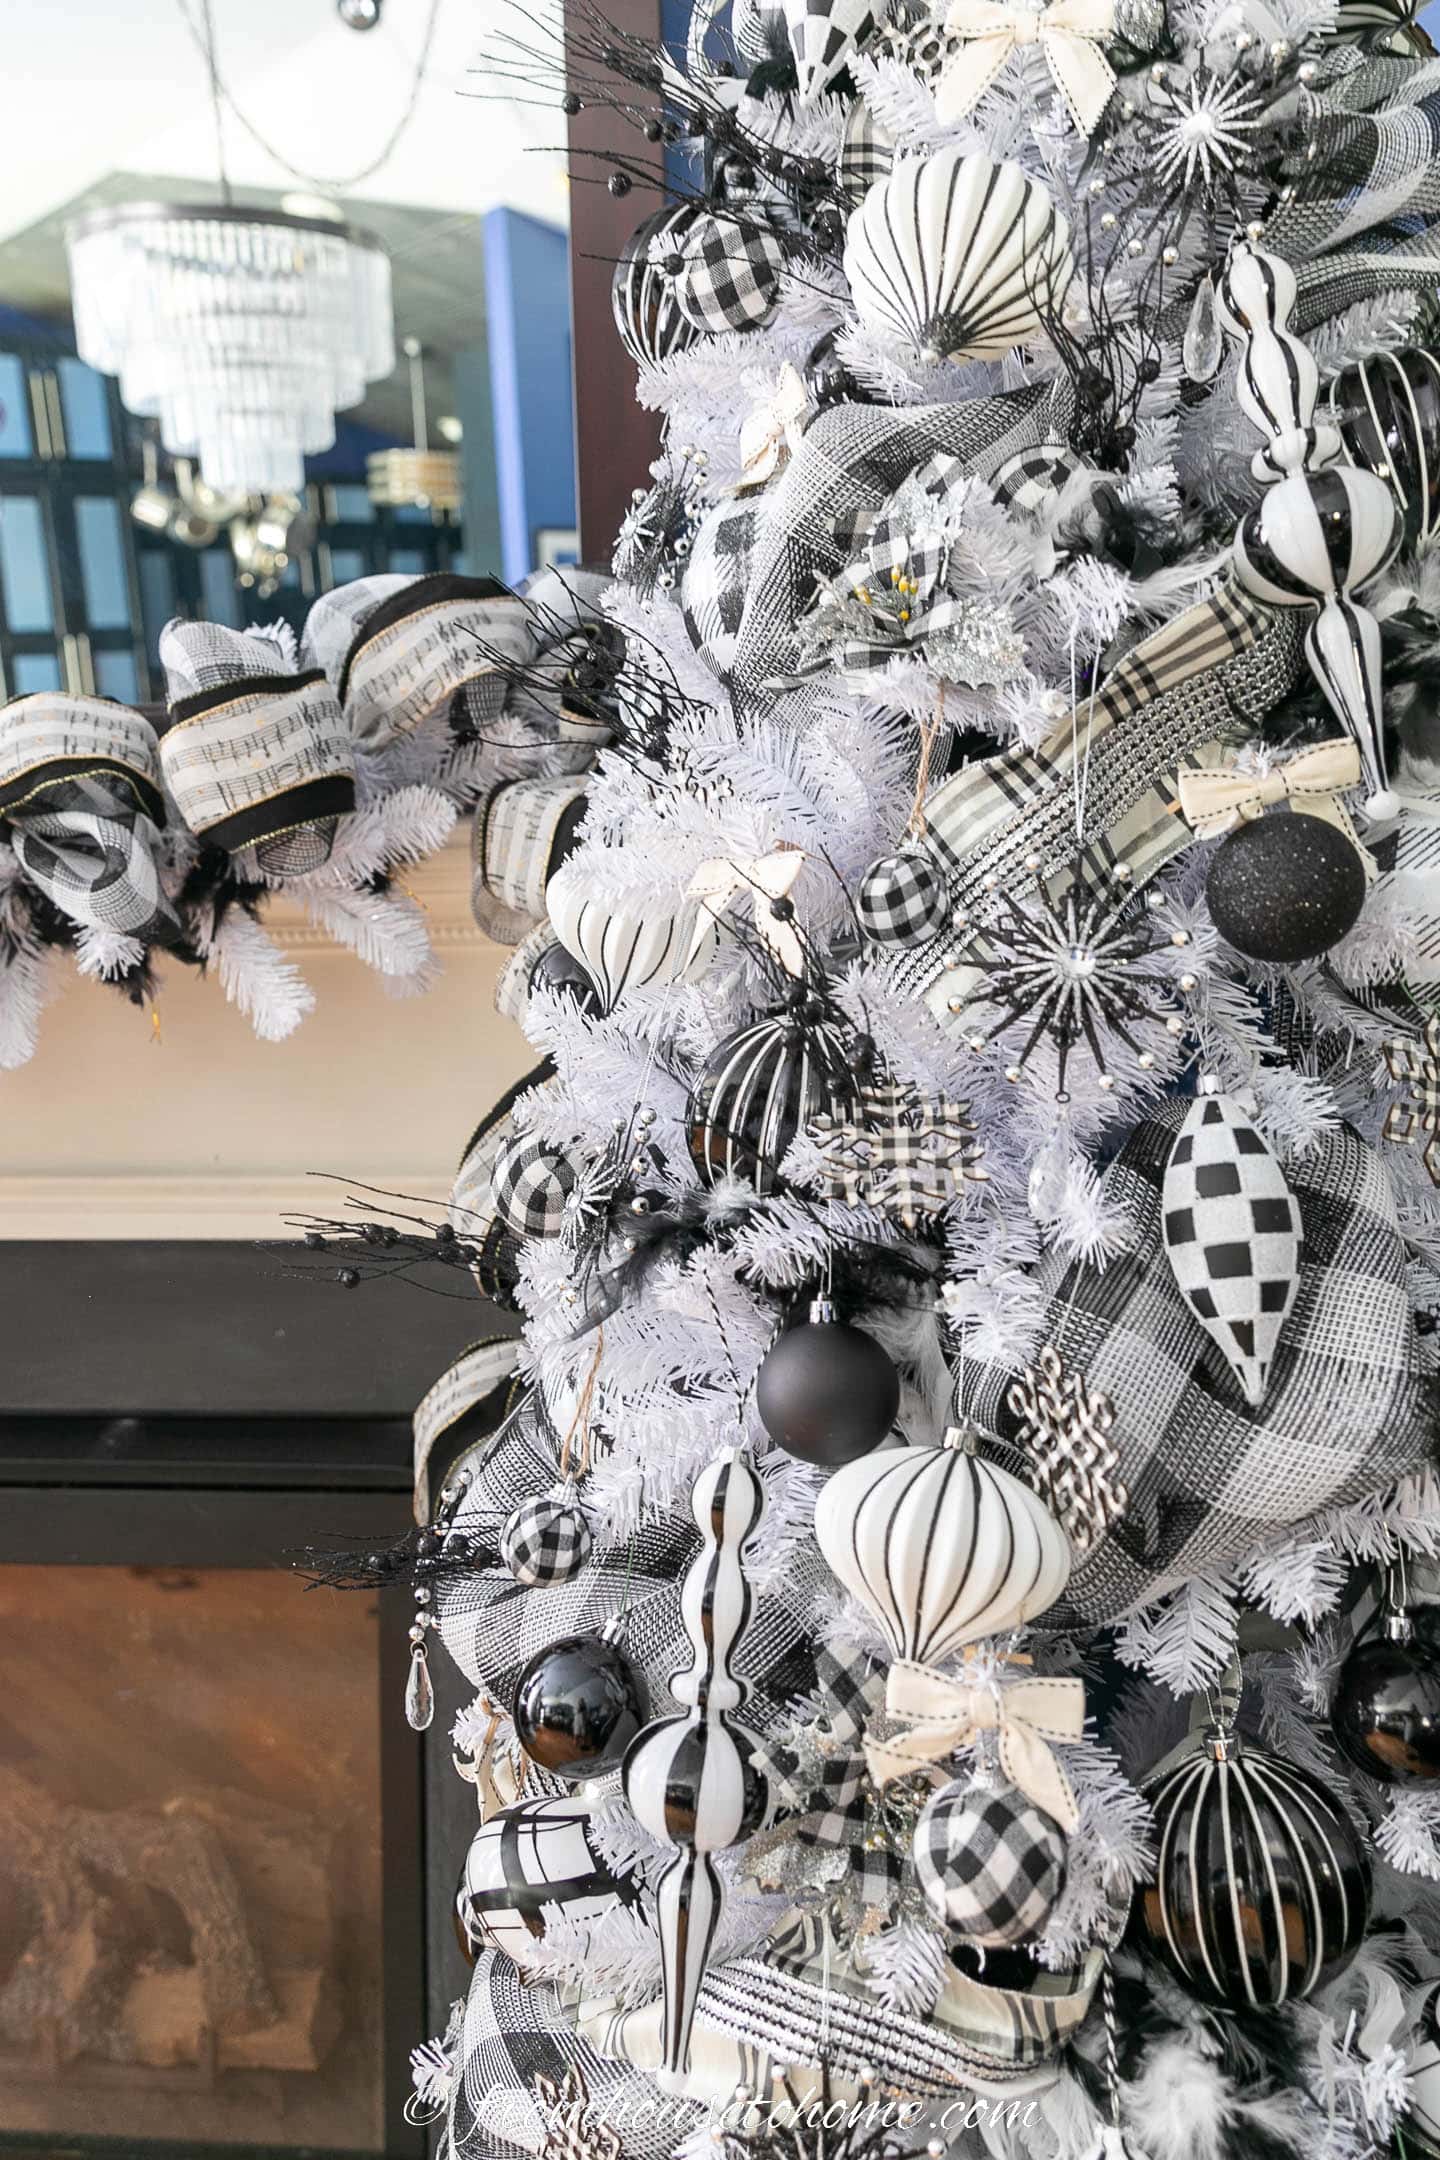 A white Christmas tree with black and white plaid ornaments in front of a fireplace mantel with a black and white garland